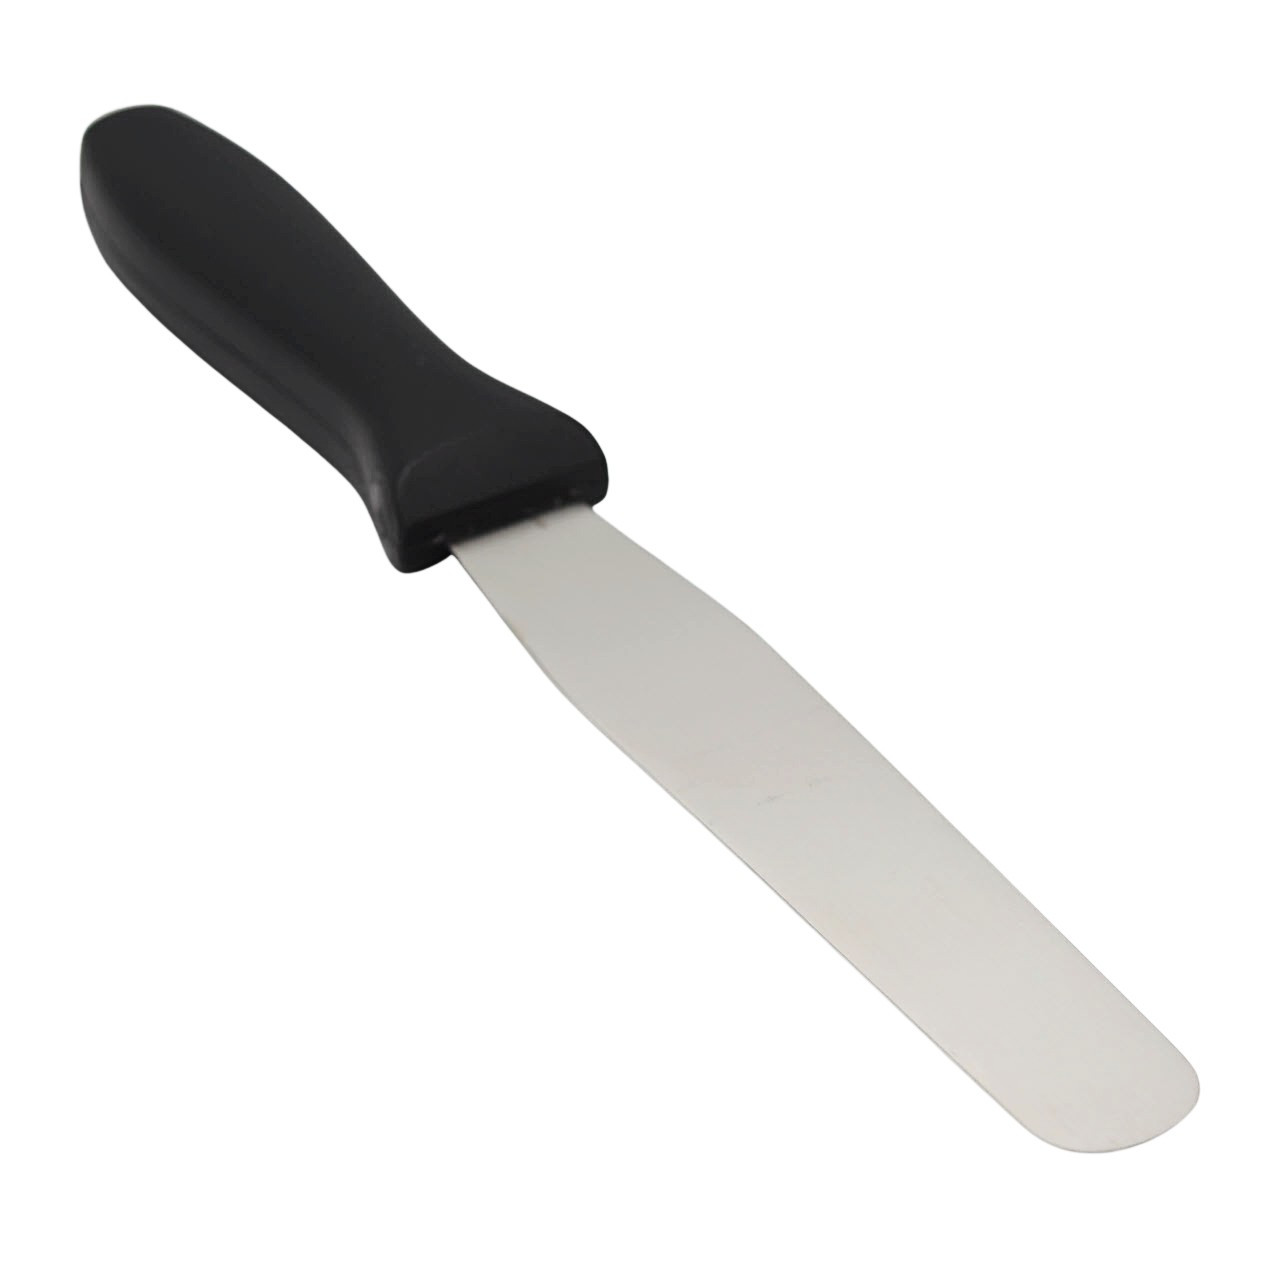 Fat Daddio's Stainless Steel Offset Spatula - 8